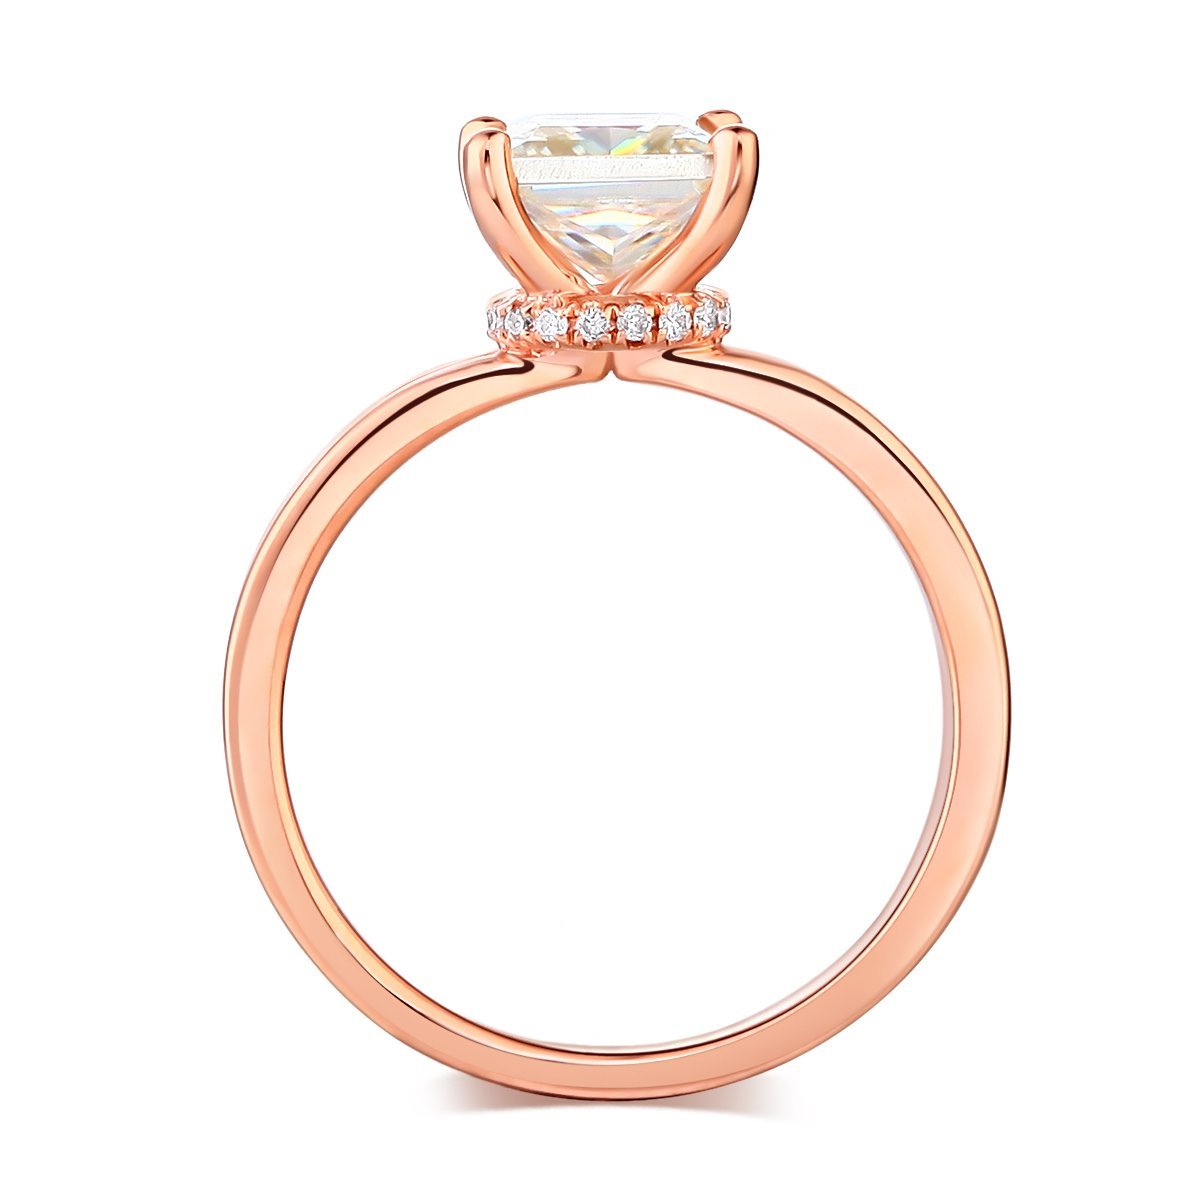 Princess Cut 14k Solid Rose Gold Ring with Moissanite Diamond Stone